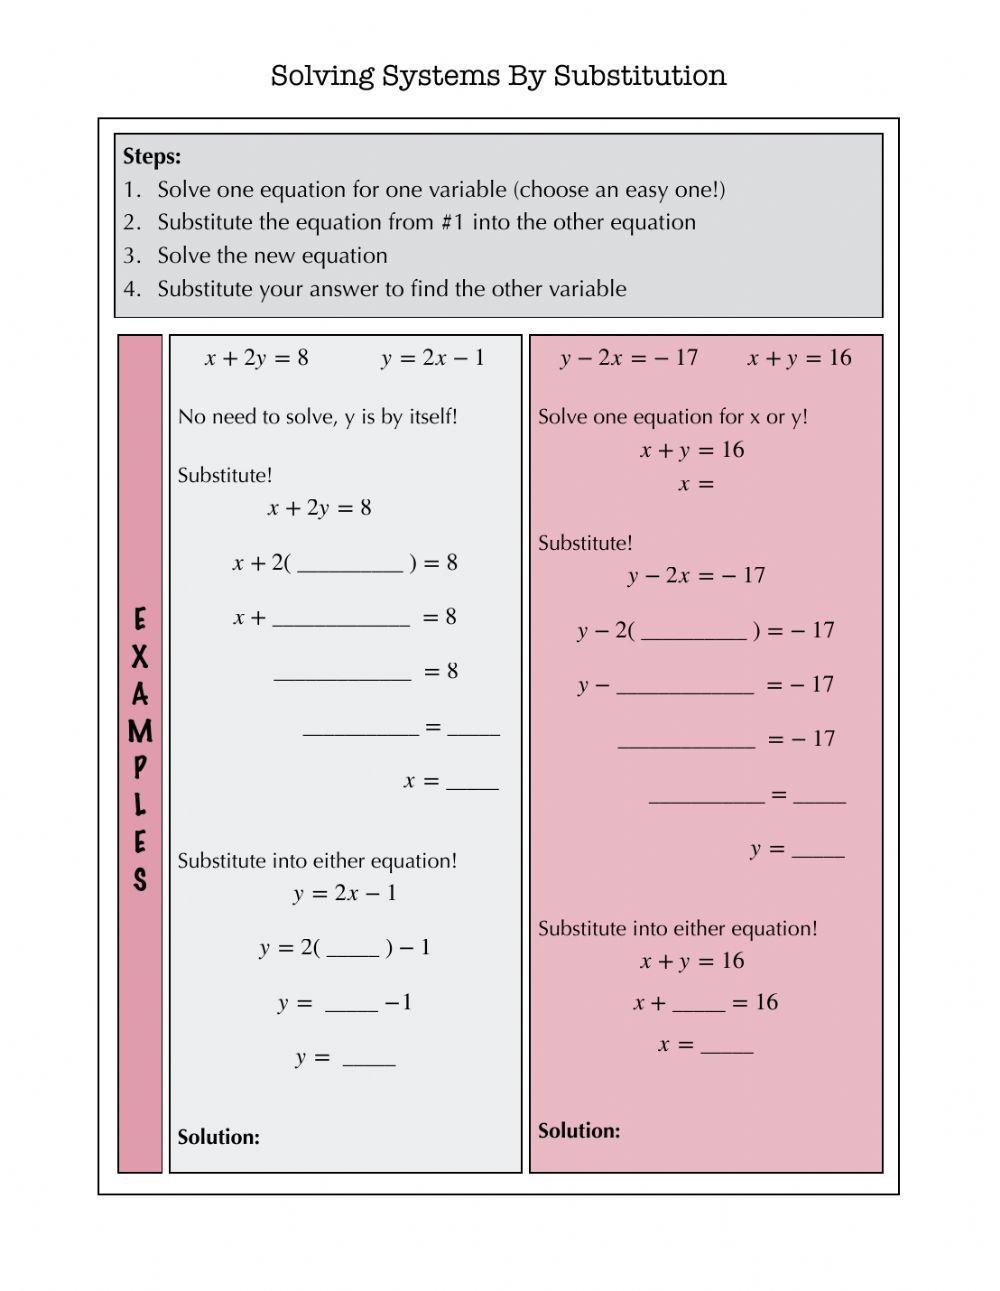 Solving Systems by Substitution Notes